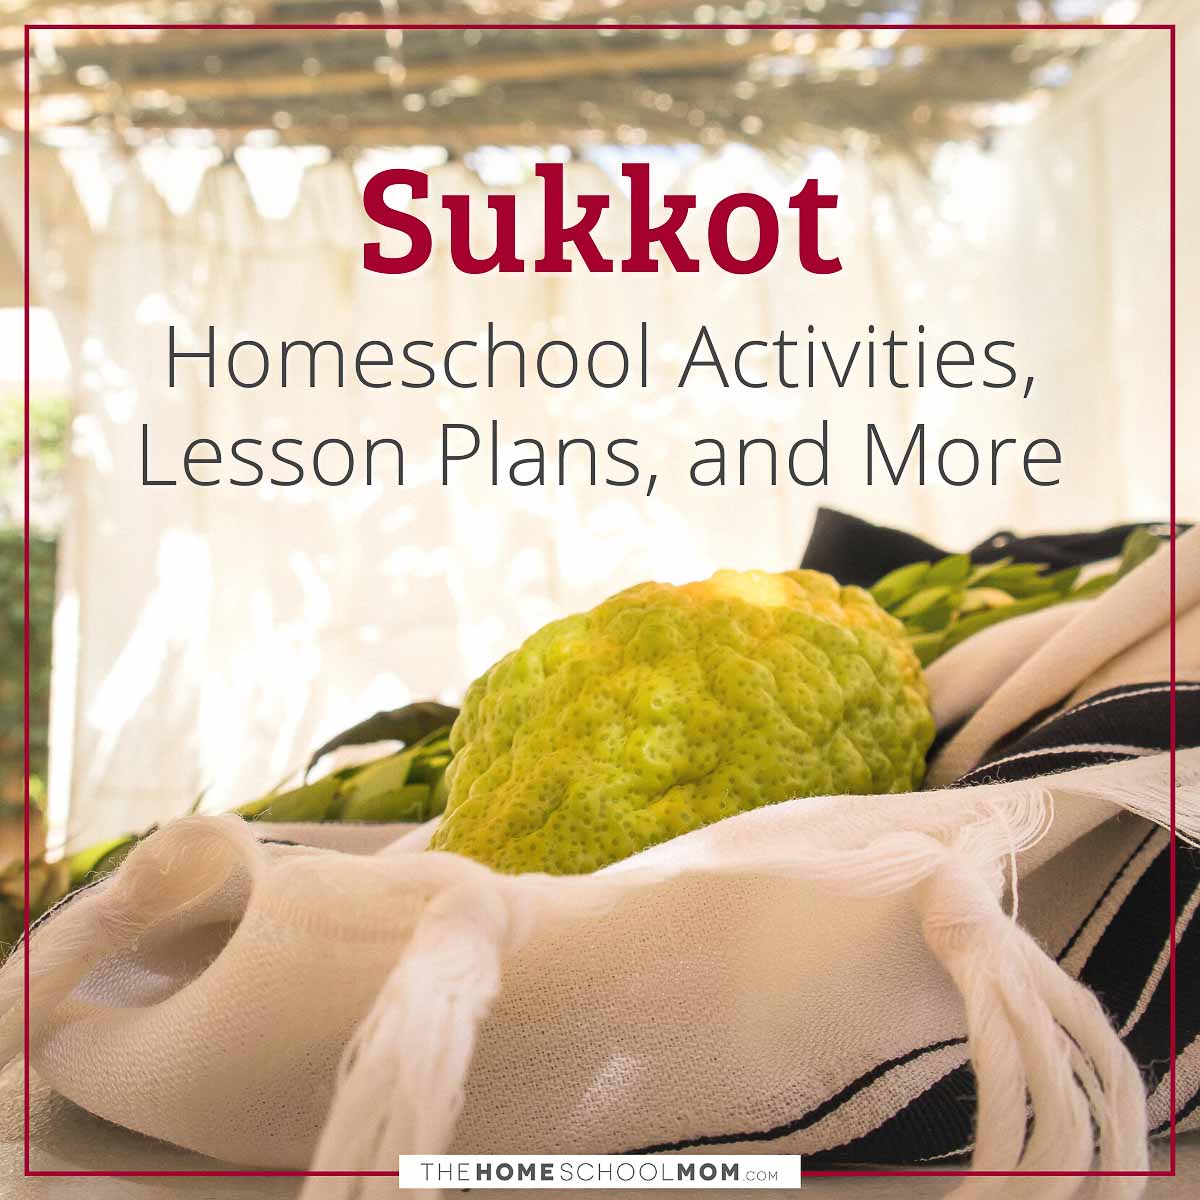 Sukkot Homeschool Activities, Lesson Plans, and More.